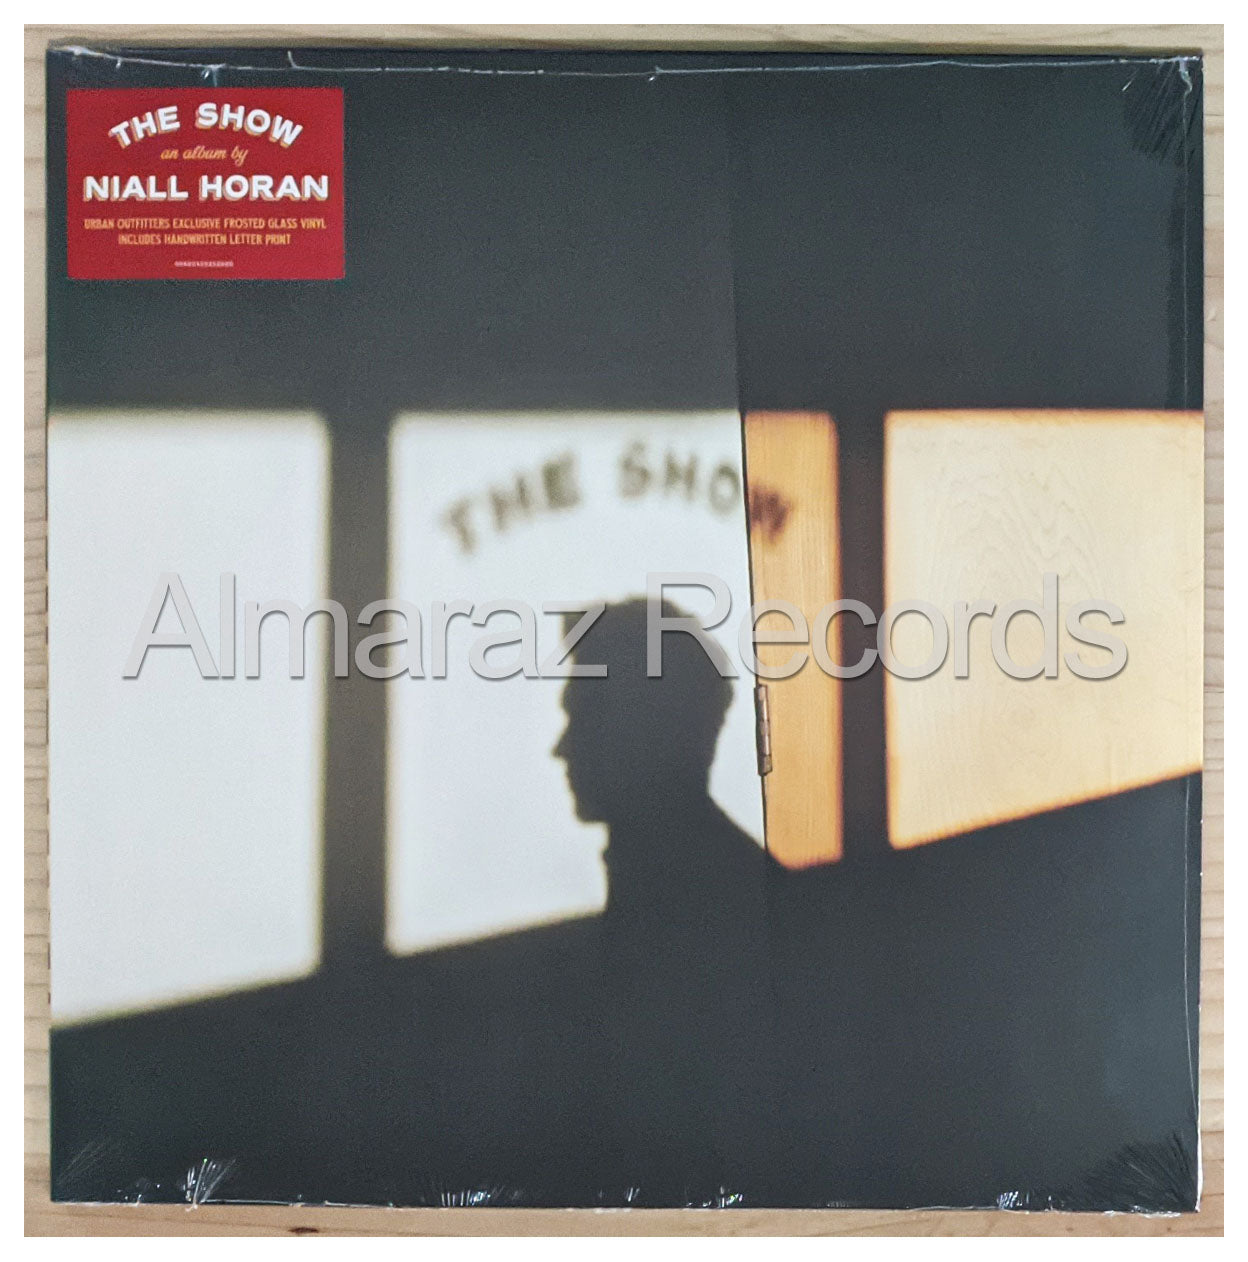 Niall Horan The Show Limited Frosted Glass Vinyl LP